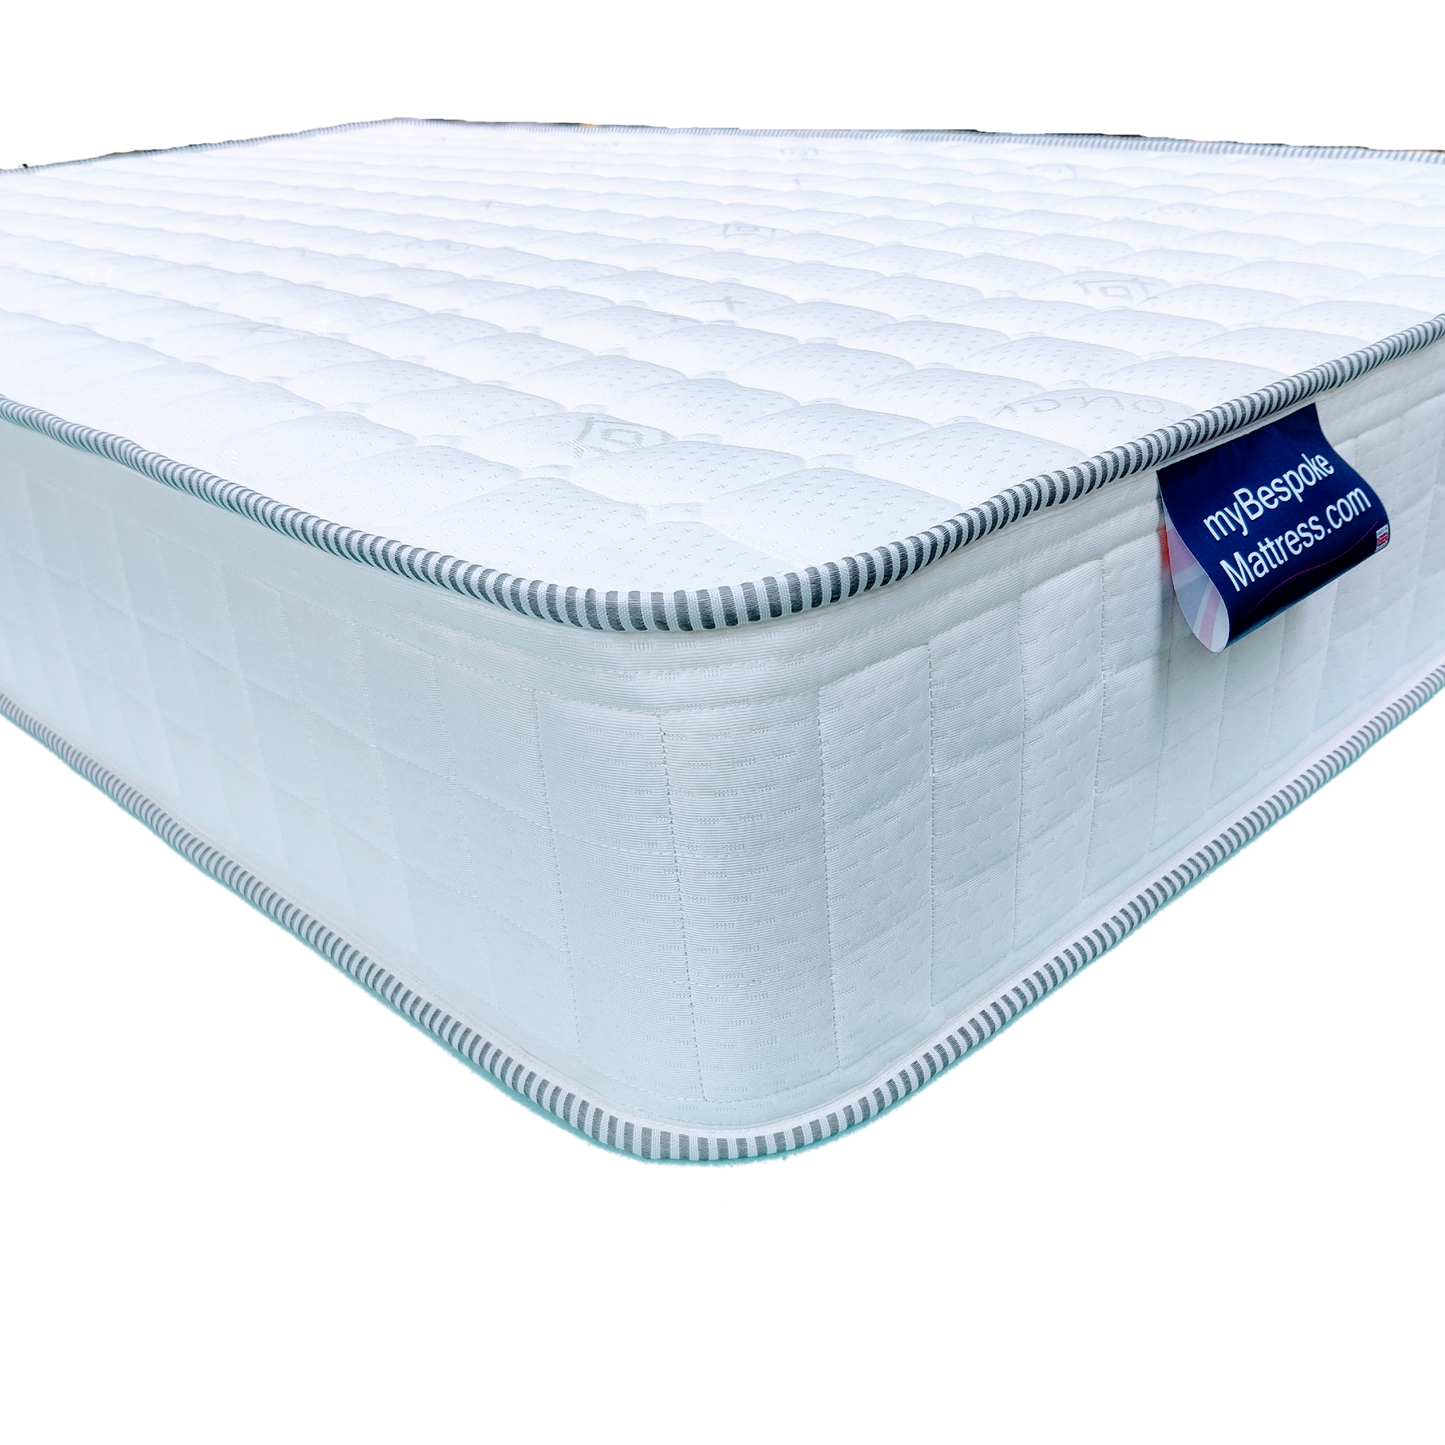 Curved-Corner Mattress with Offside Angled Cut